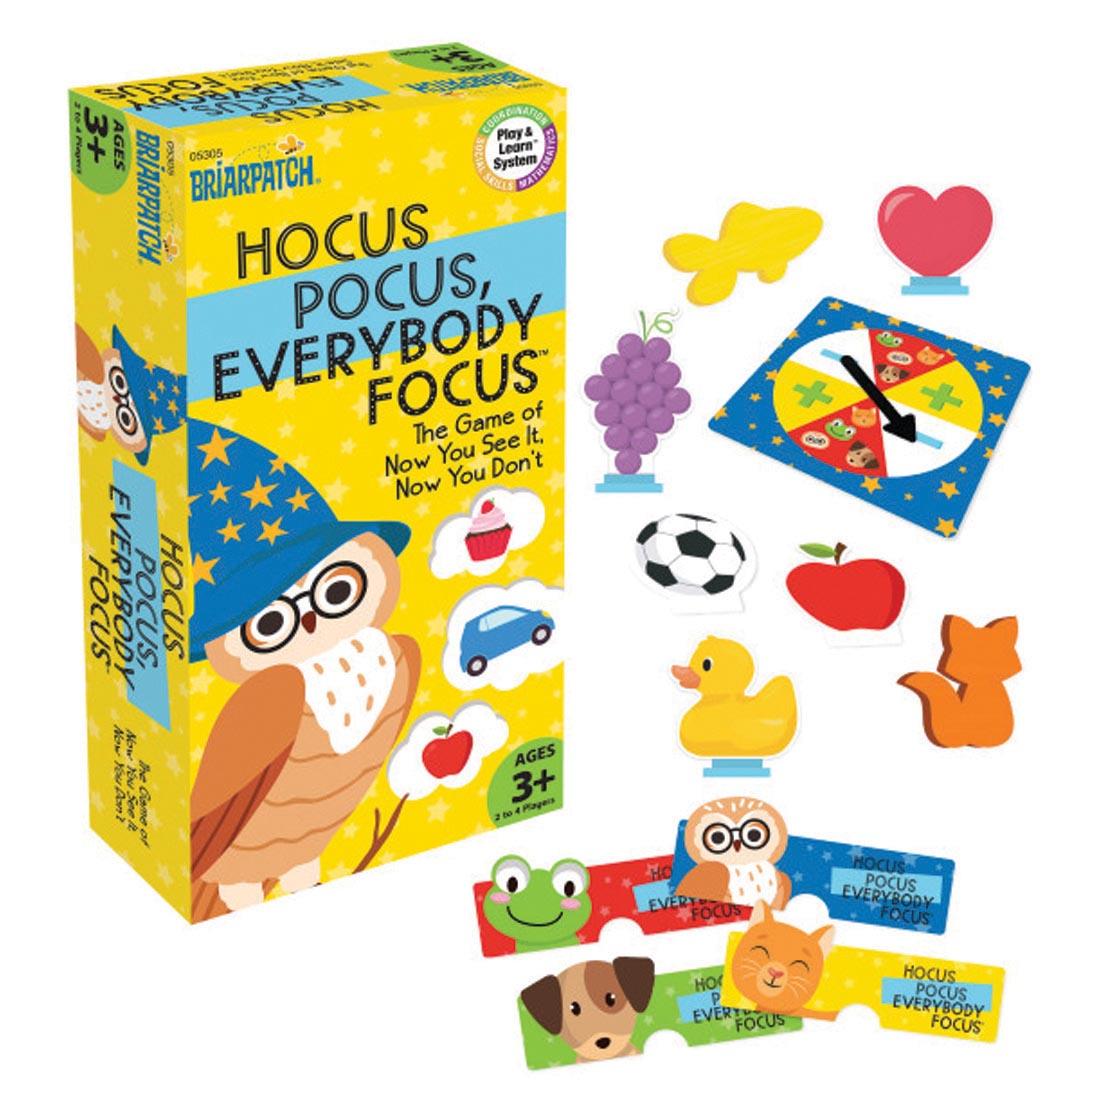 Hocus Pocus, Everybody Focus Game By Briarpatch